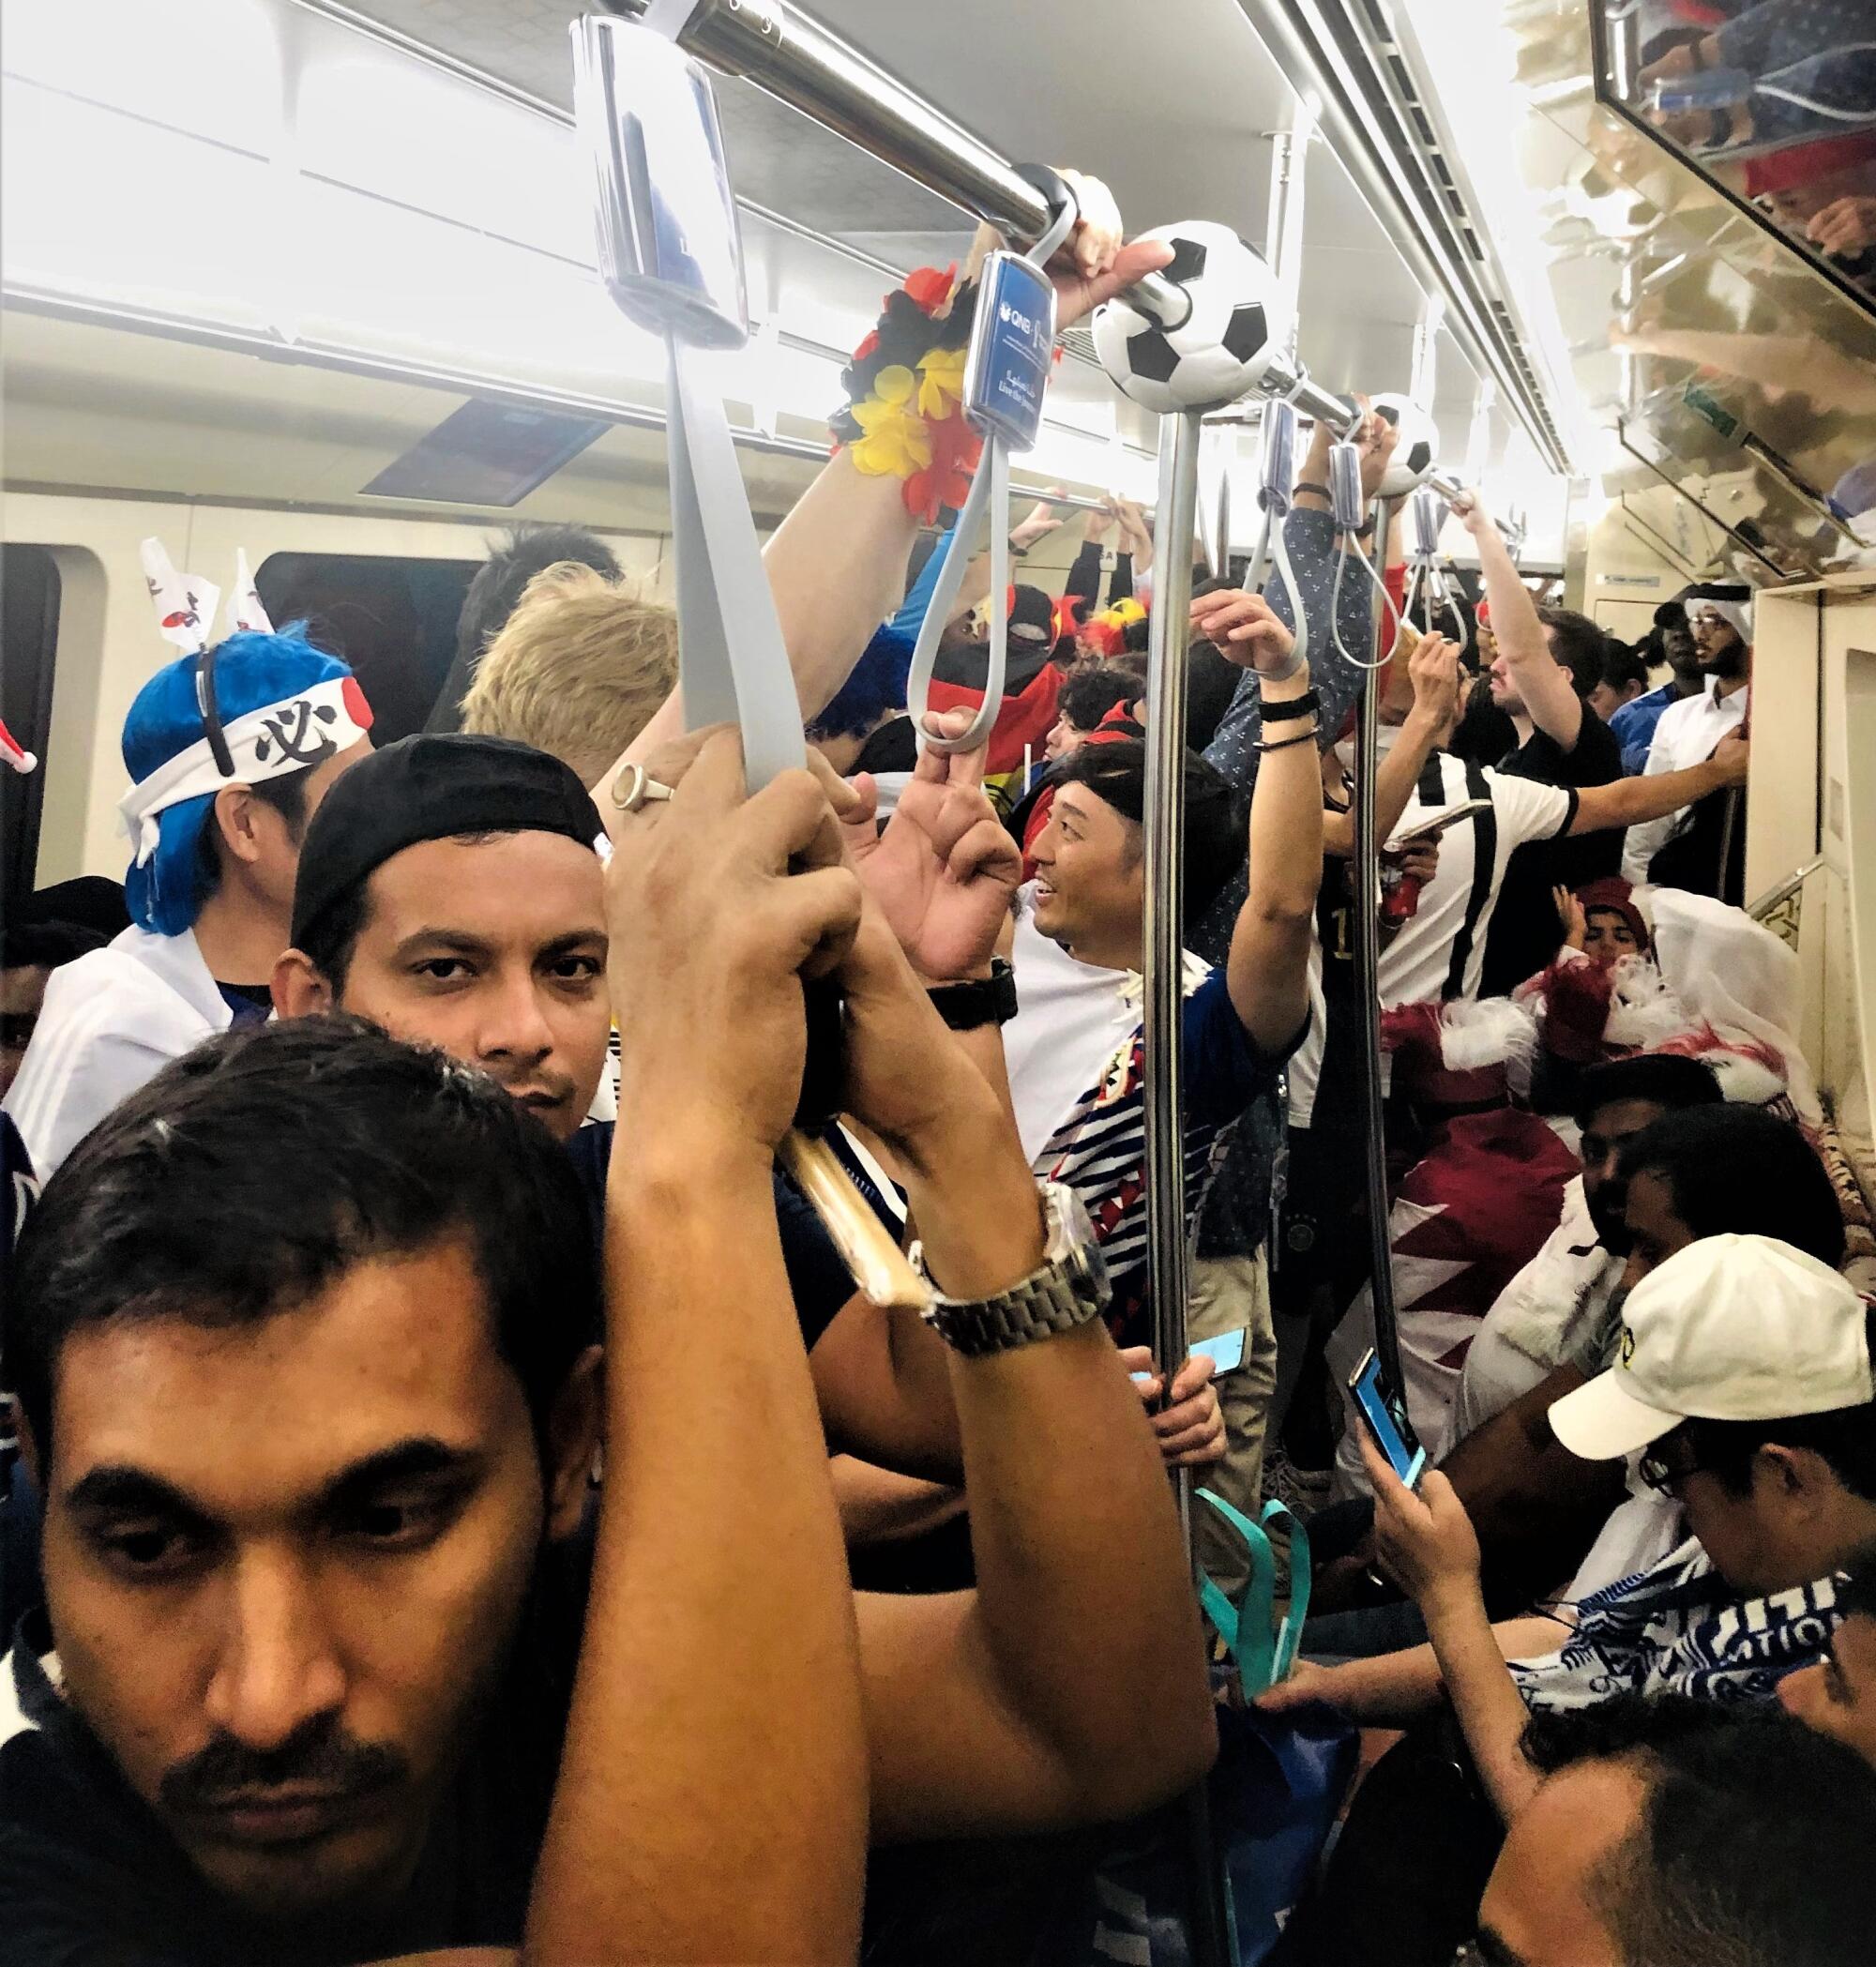 World Cup fans stand in a packed subway train Wednesday in Qatar.